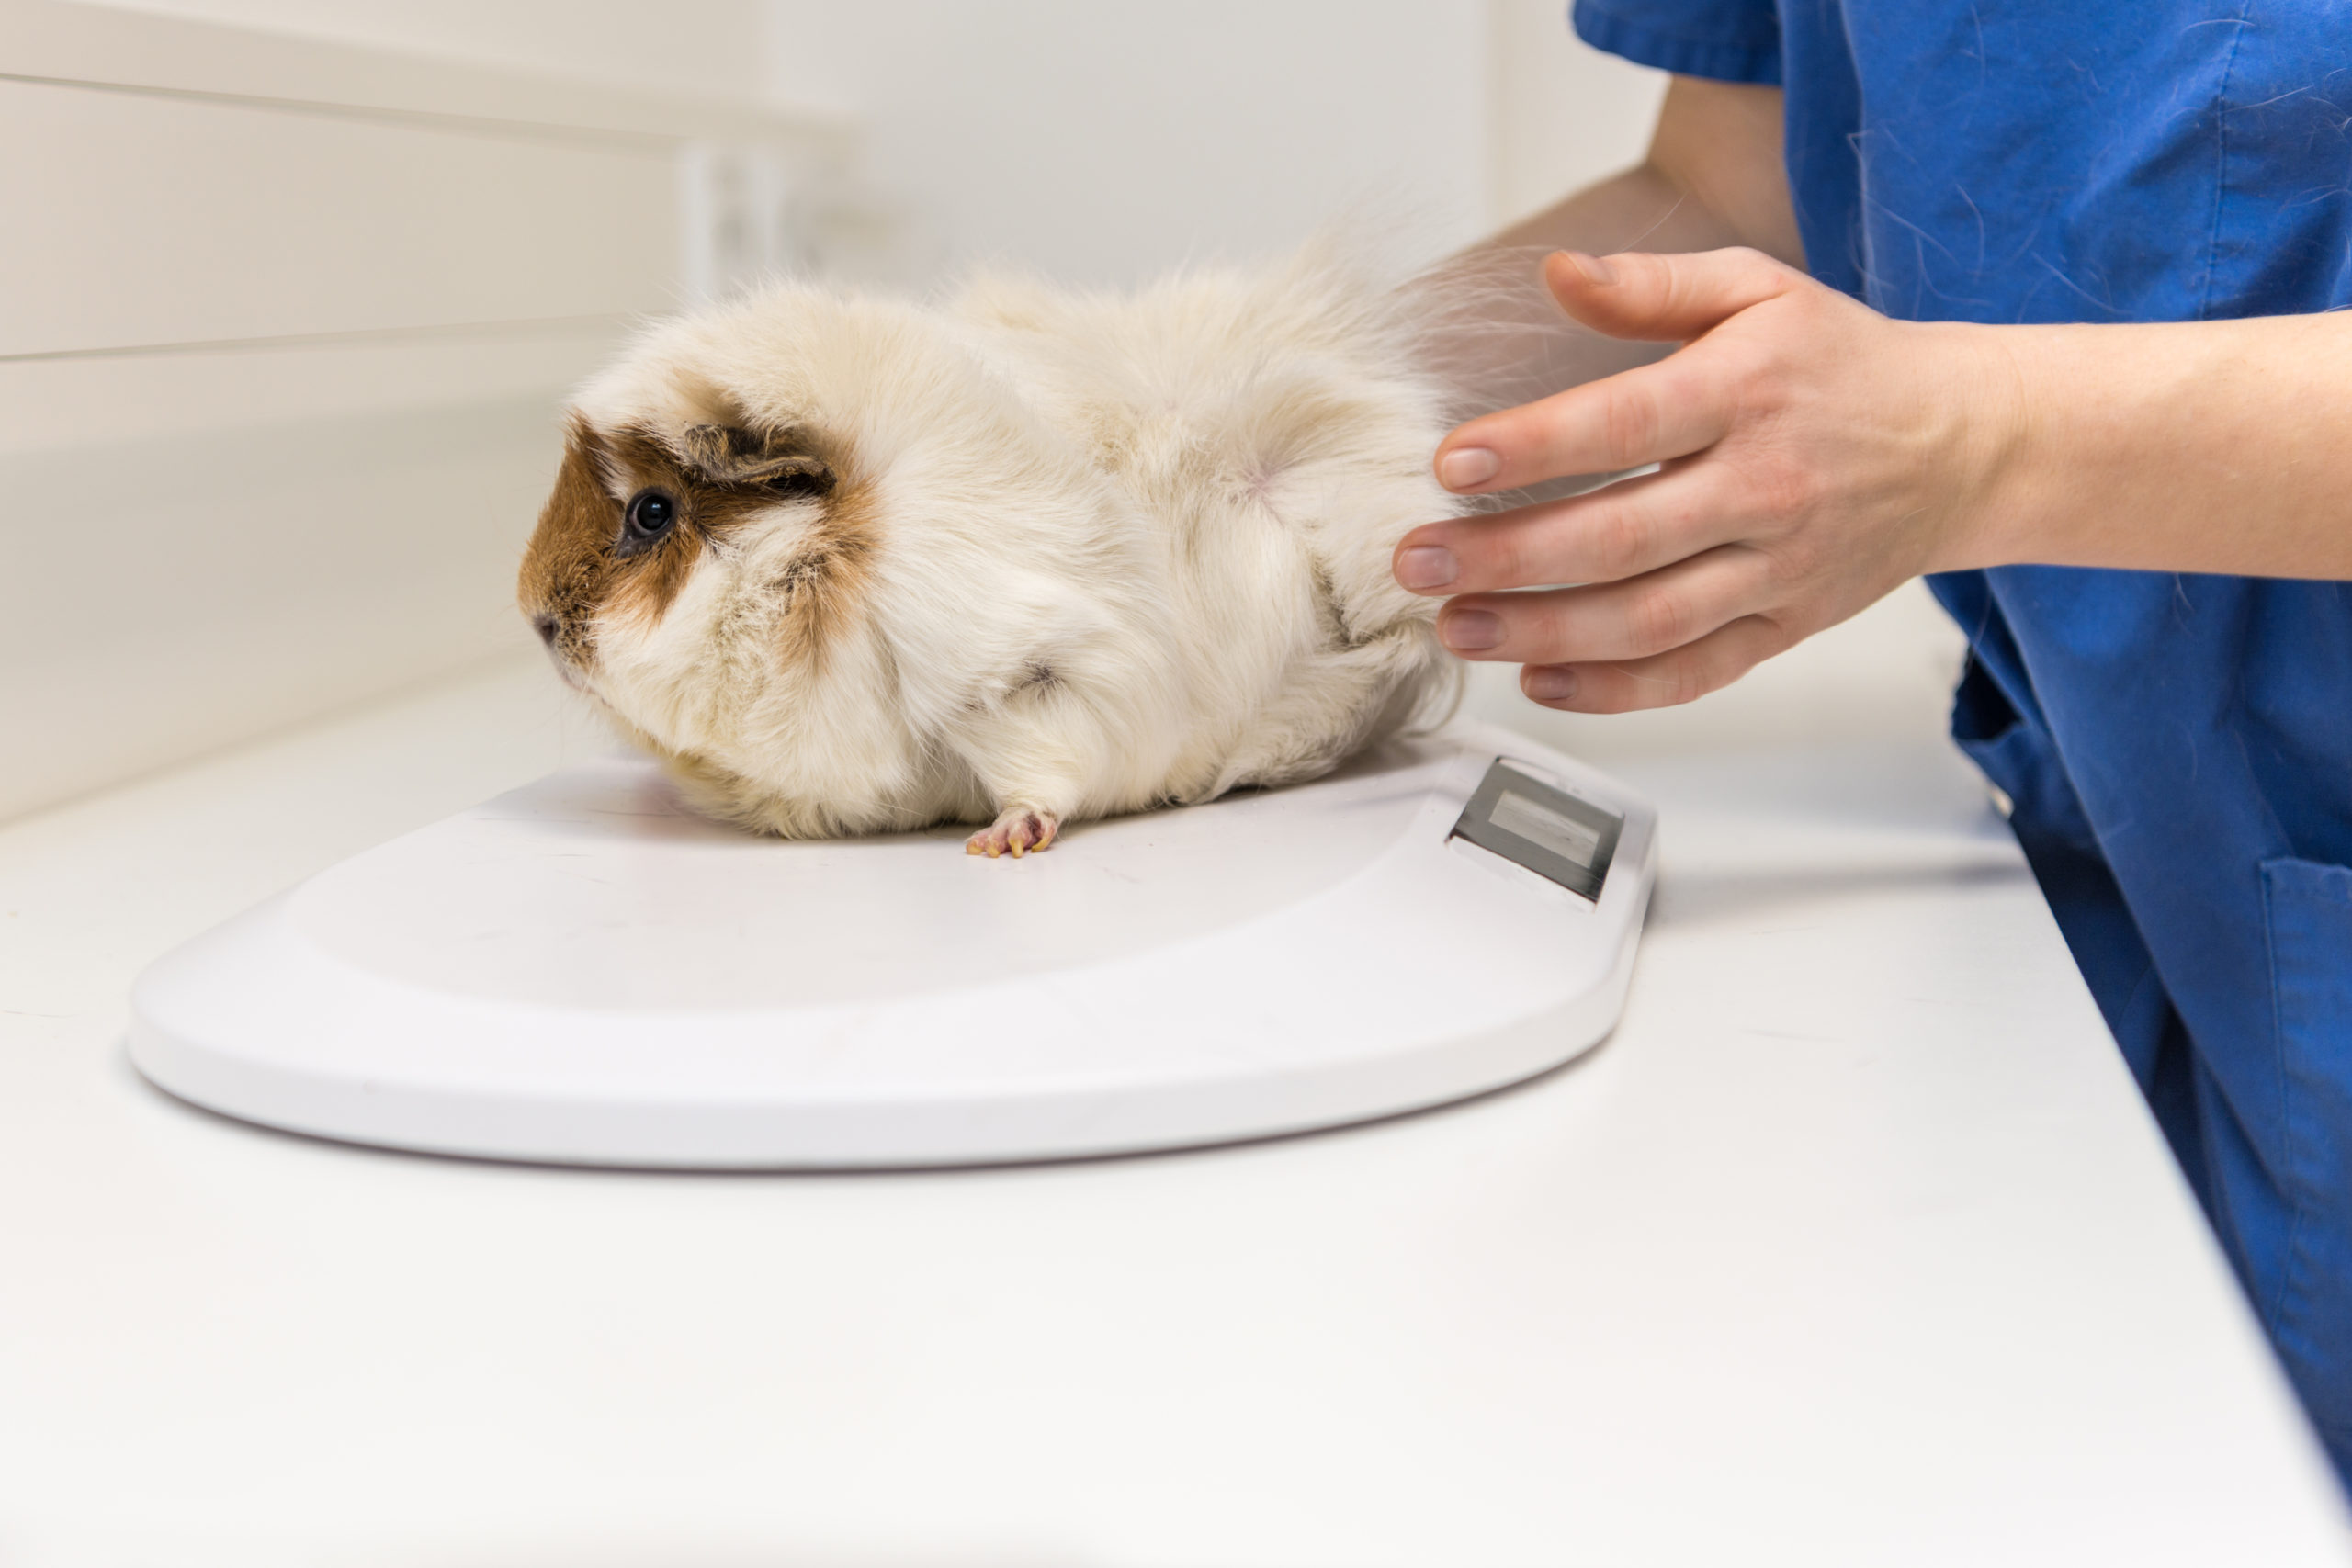 Guinea pig on the scale at the vet